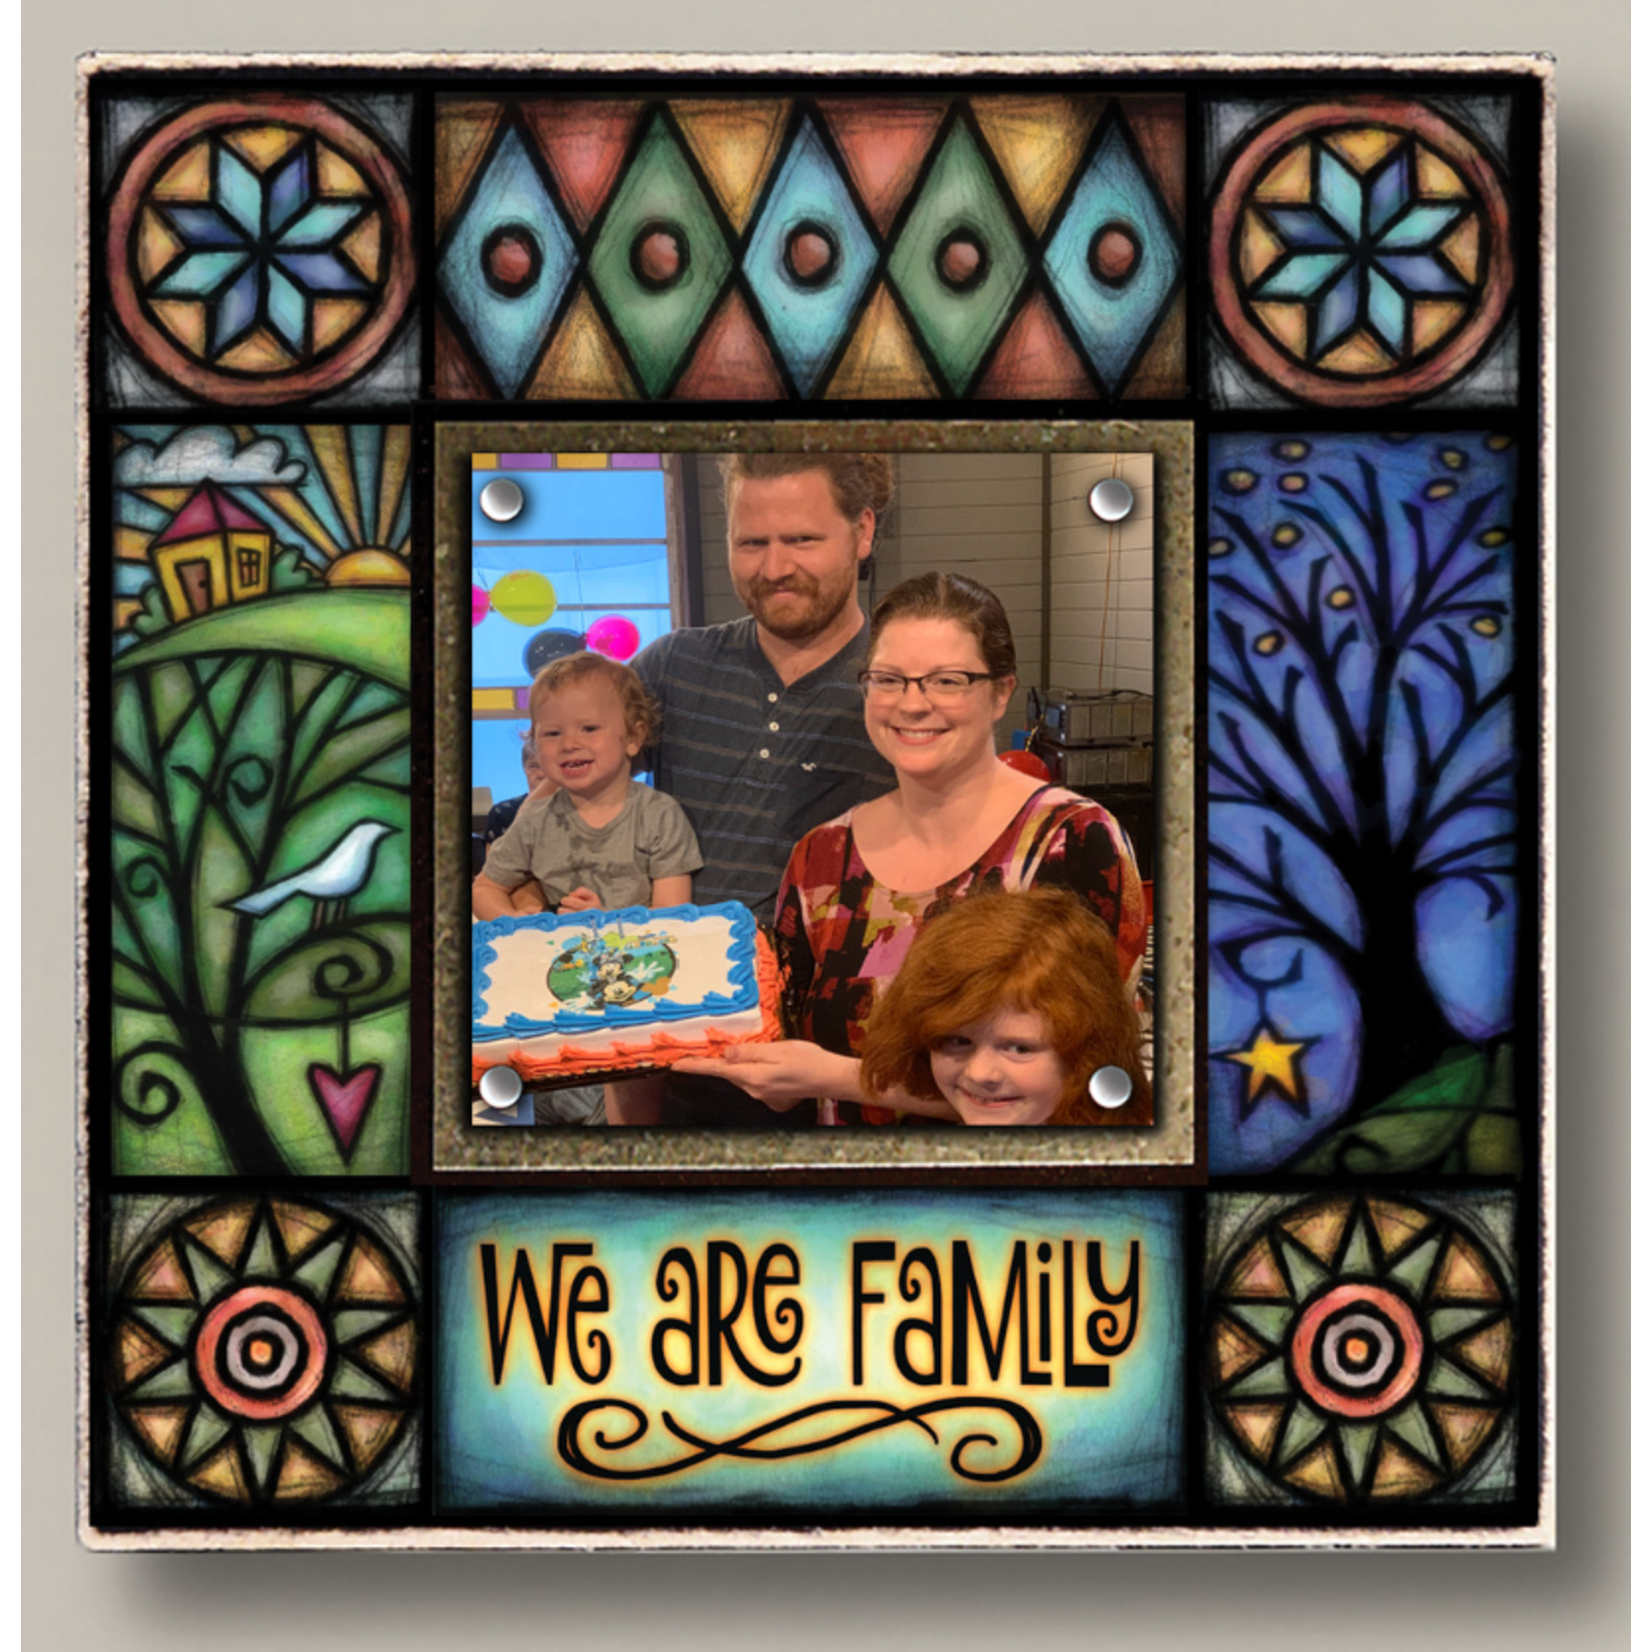 Spooner Creek Designs Picture Frame 5"x5" - We Are Family